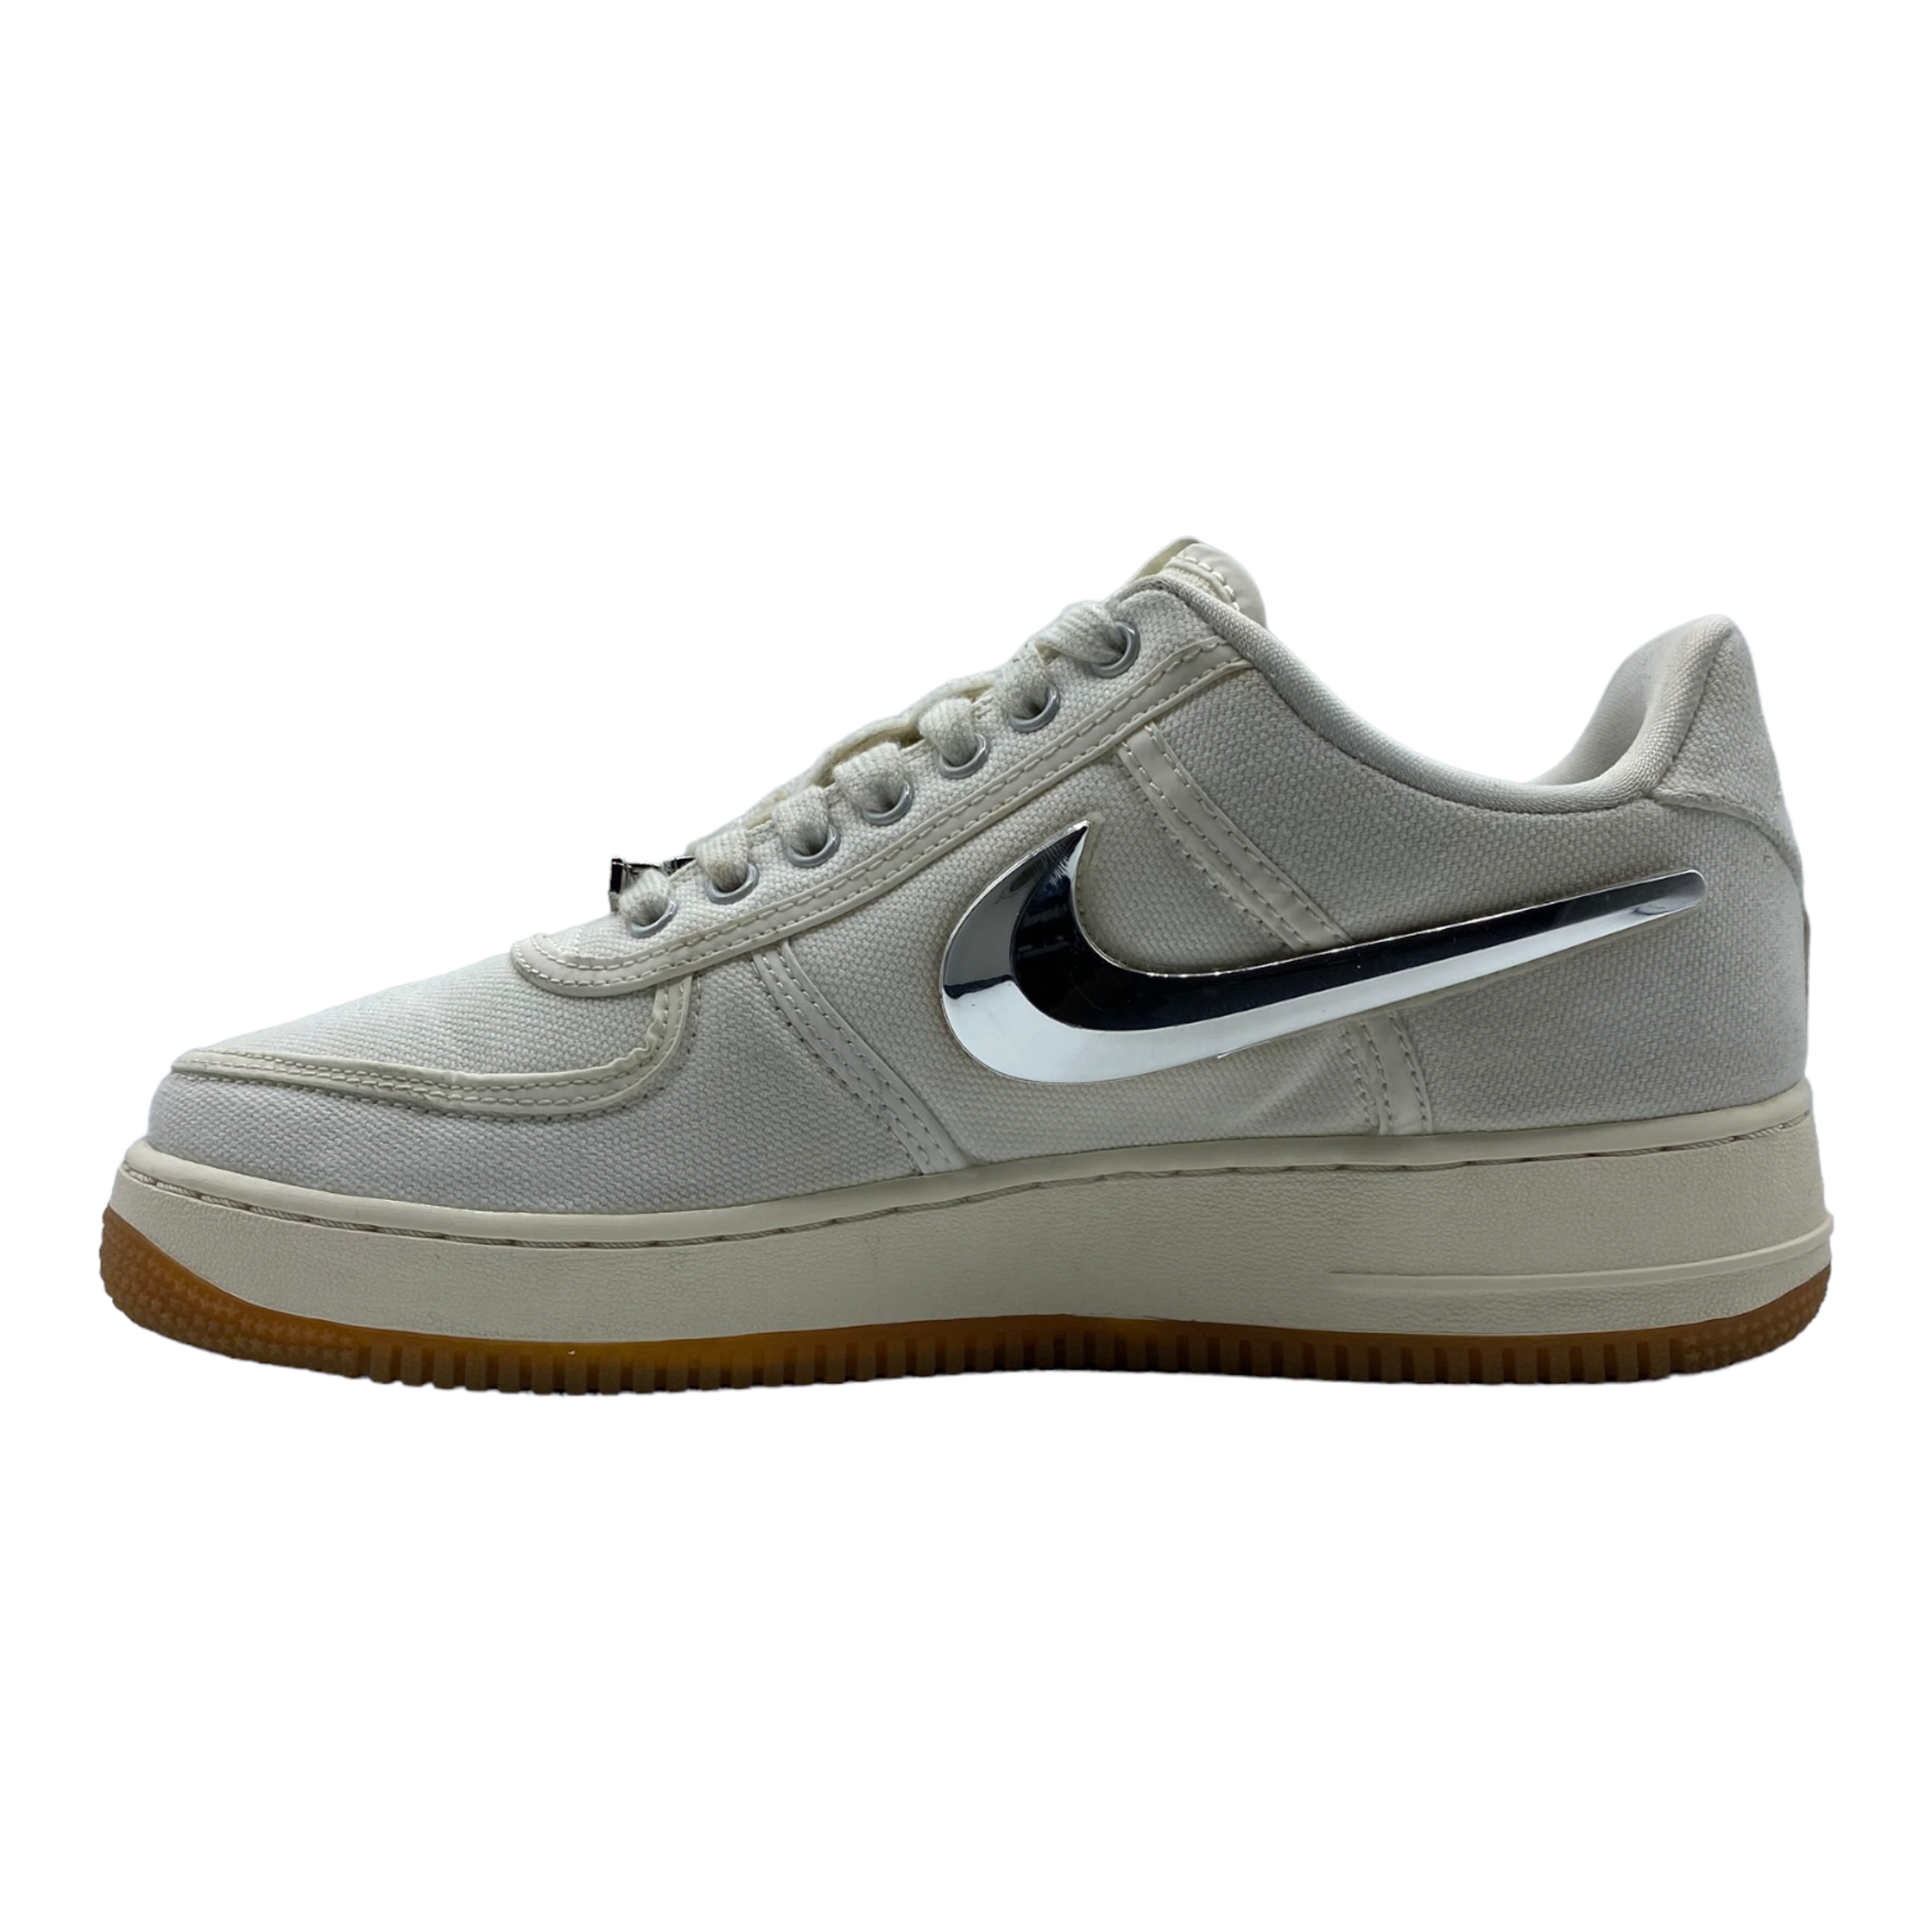 Alternate View 2 of Nike Air Force 1 Low Travis Scott Sail Pre-Owned